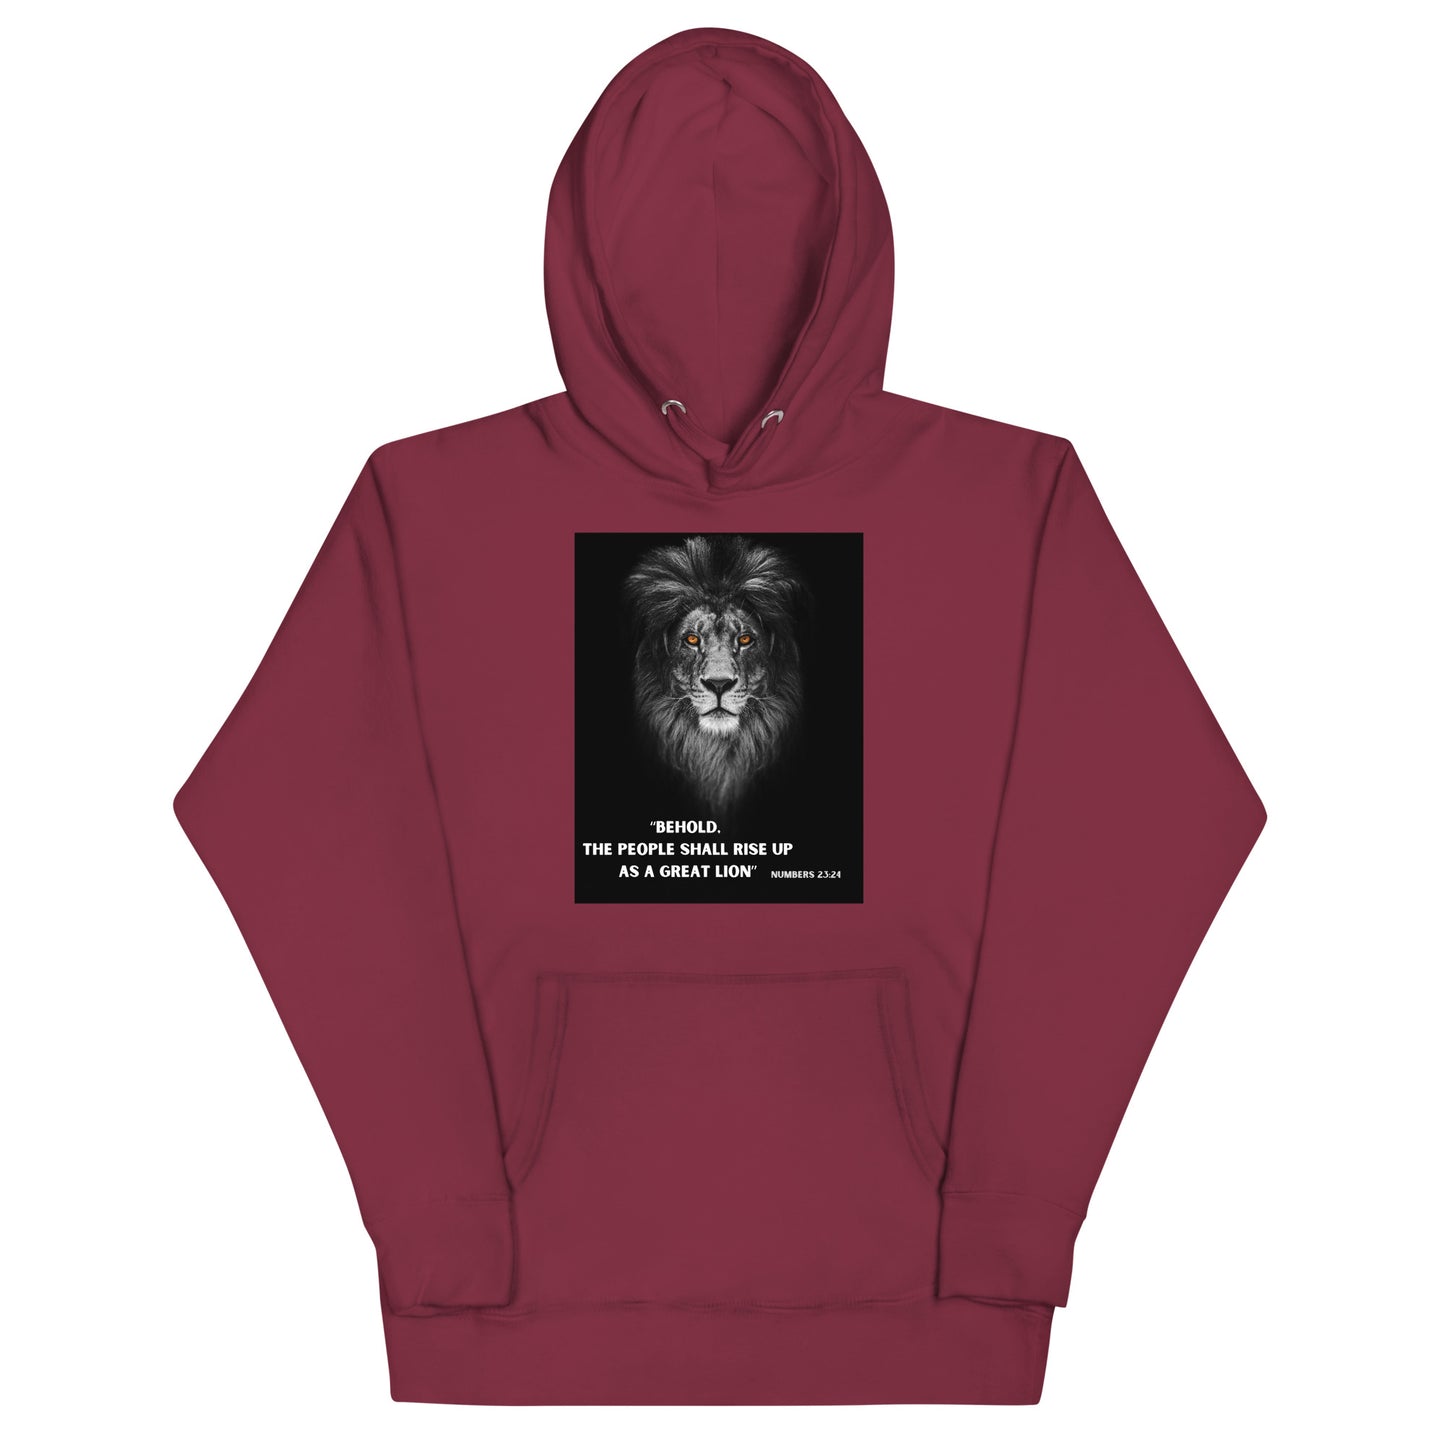 The people shall rise up! (English) - Unisex Hoodie (6 colors)